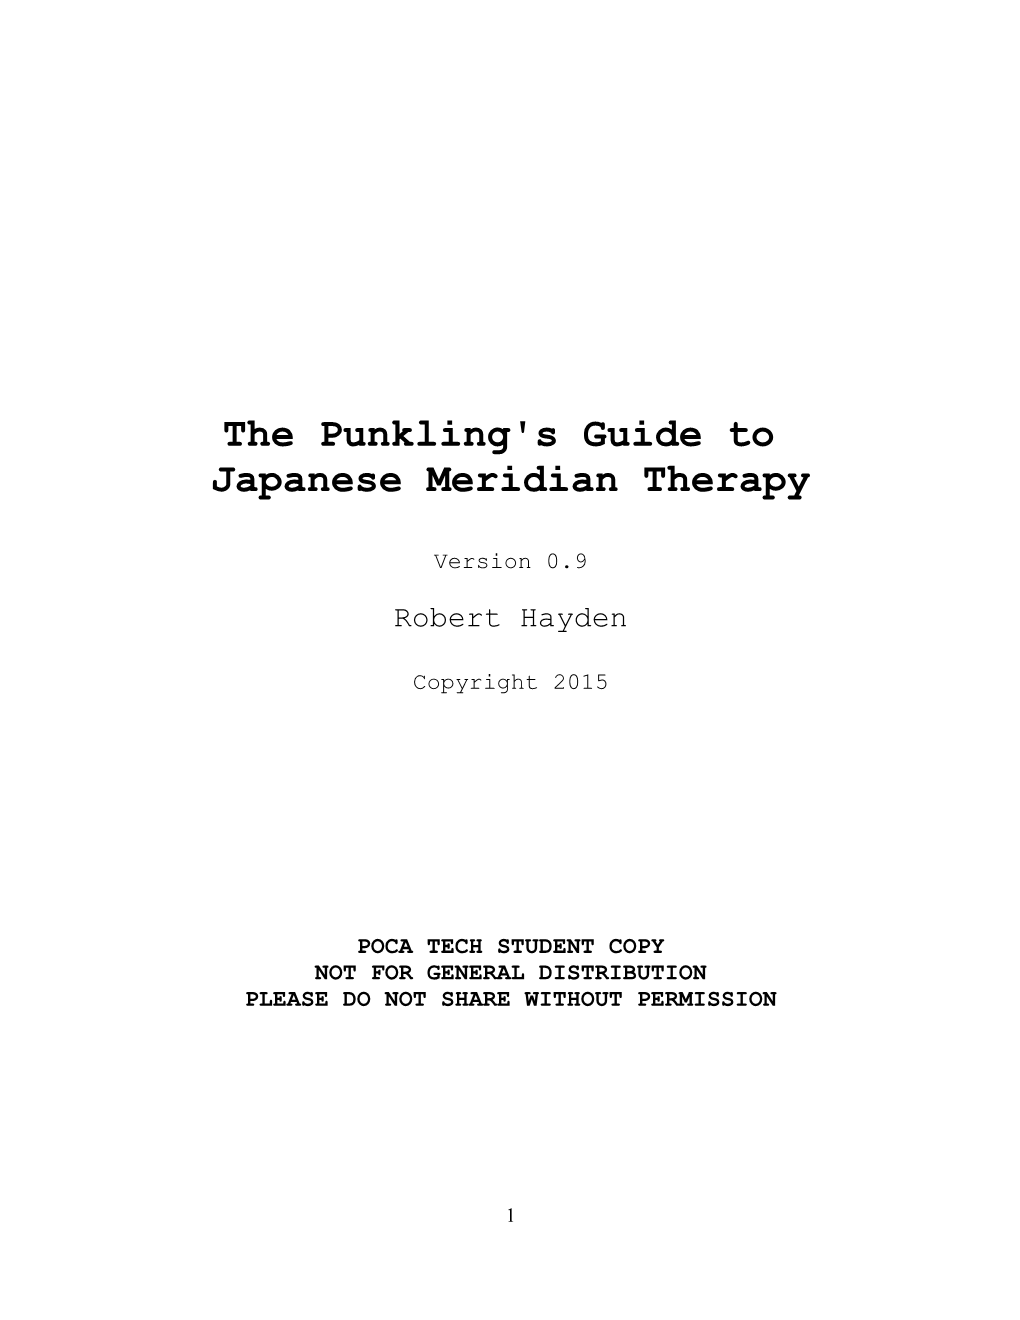 The Punkling's Guide to Japanese Meridian Therapy